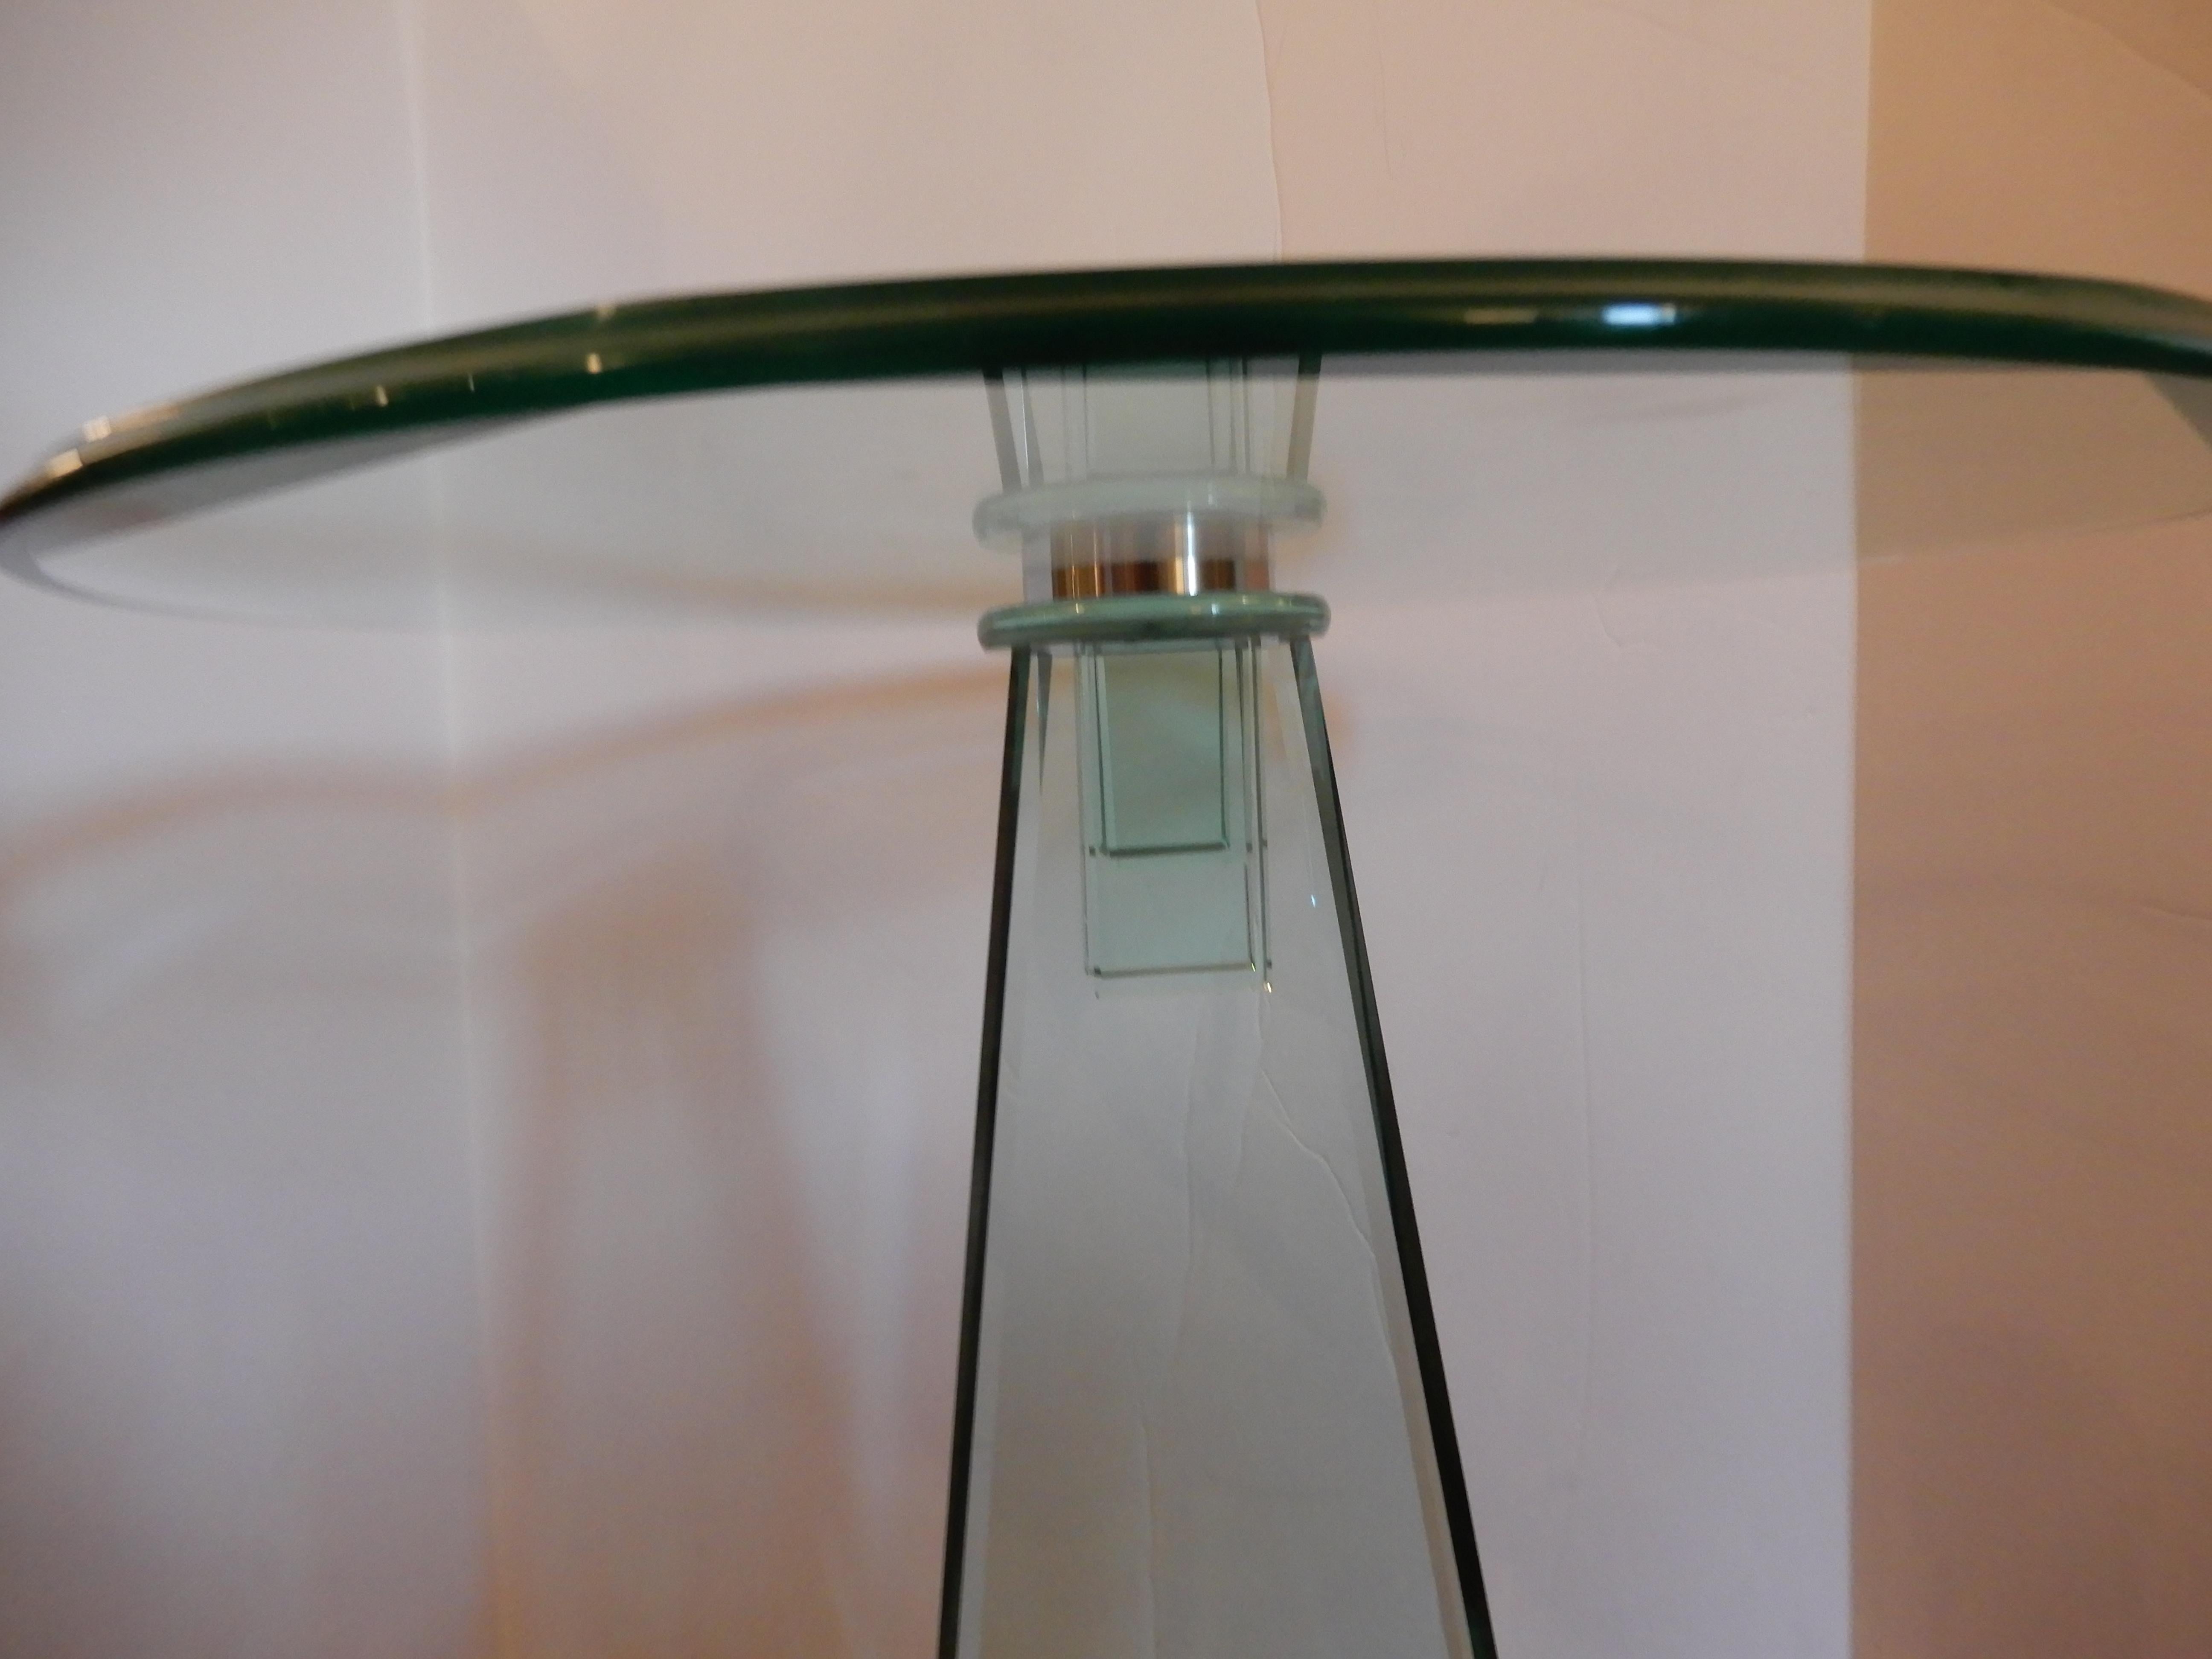 An Art Deco styled side or end table in the school of Danny Lane. The glass is triple beveled with finest craftsmanship, an Art Deco form column with chrome steel spheres on bottom plate, top glass adheres to a steel plate.